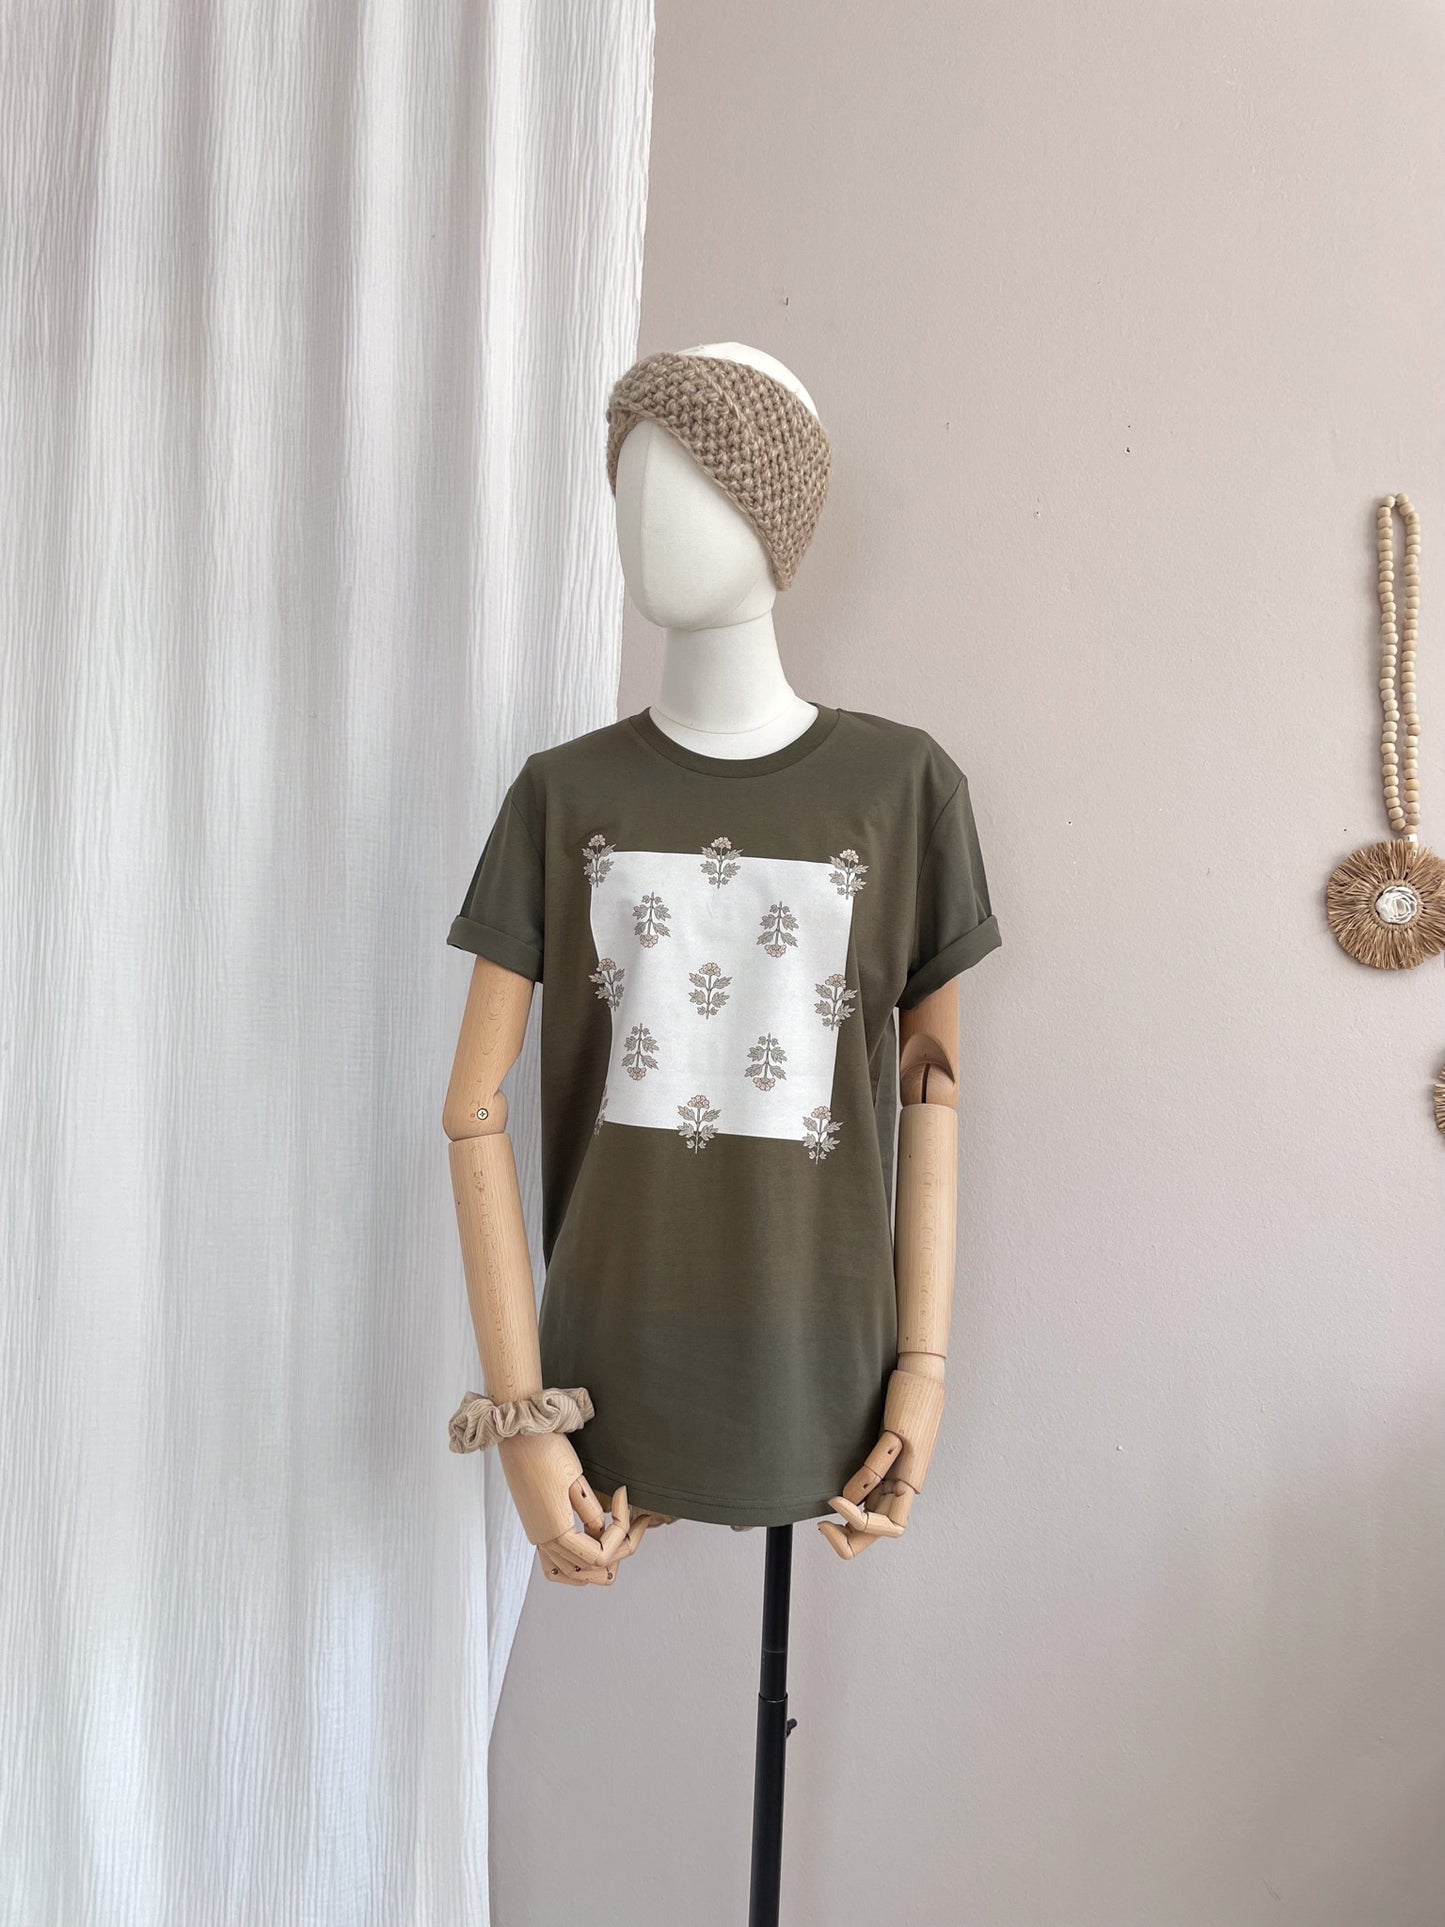 Load image into Gallery viewer, T-shirt / Just flowers / rosemary
